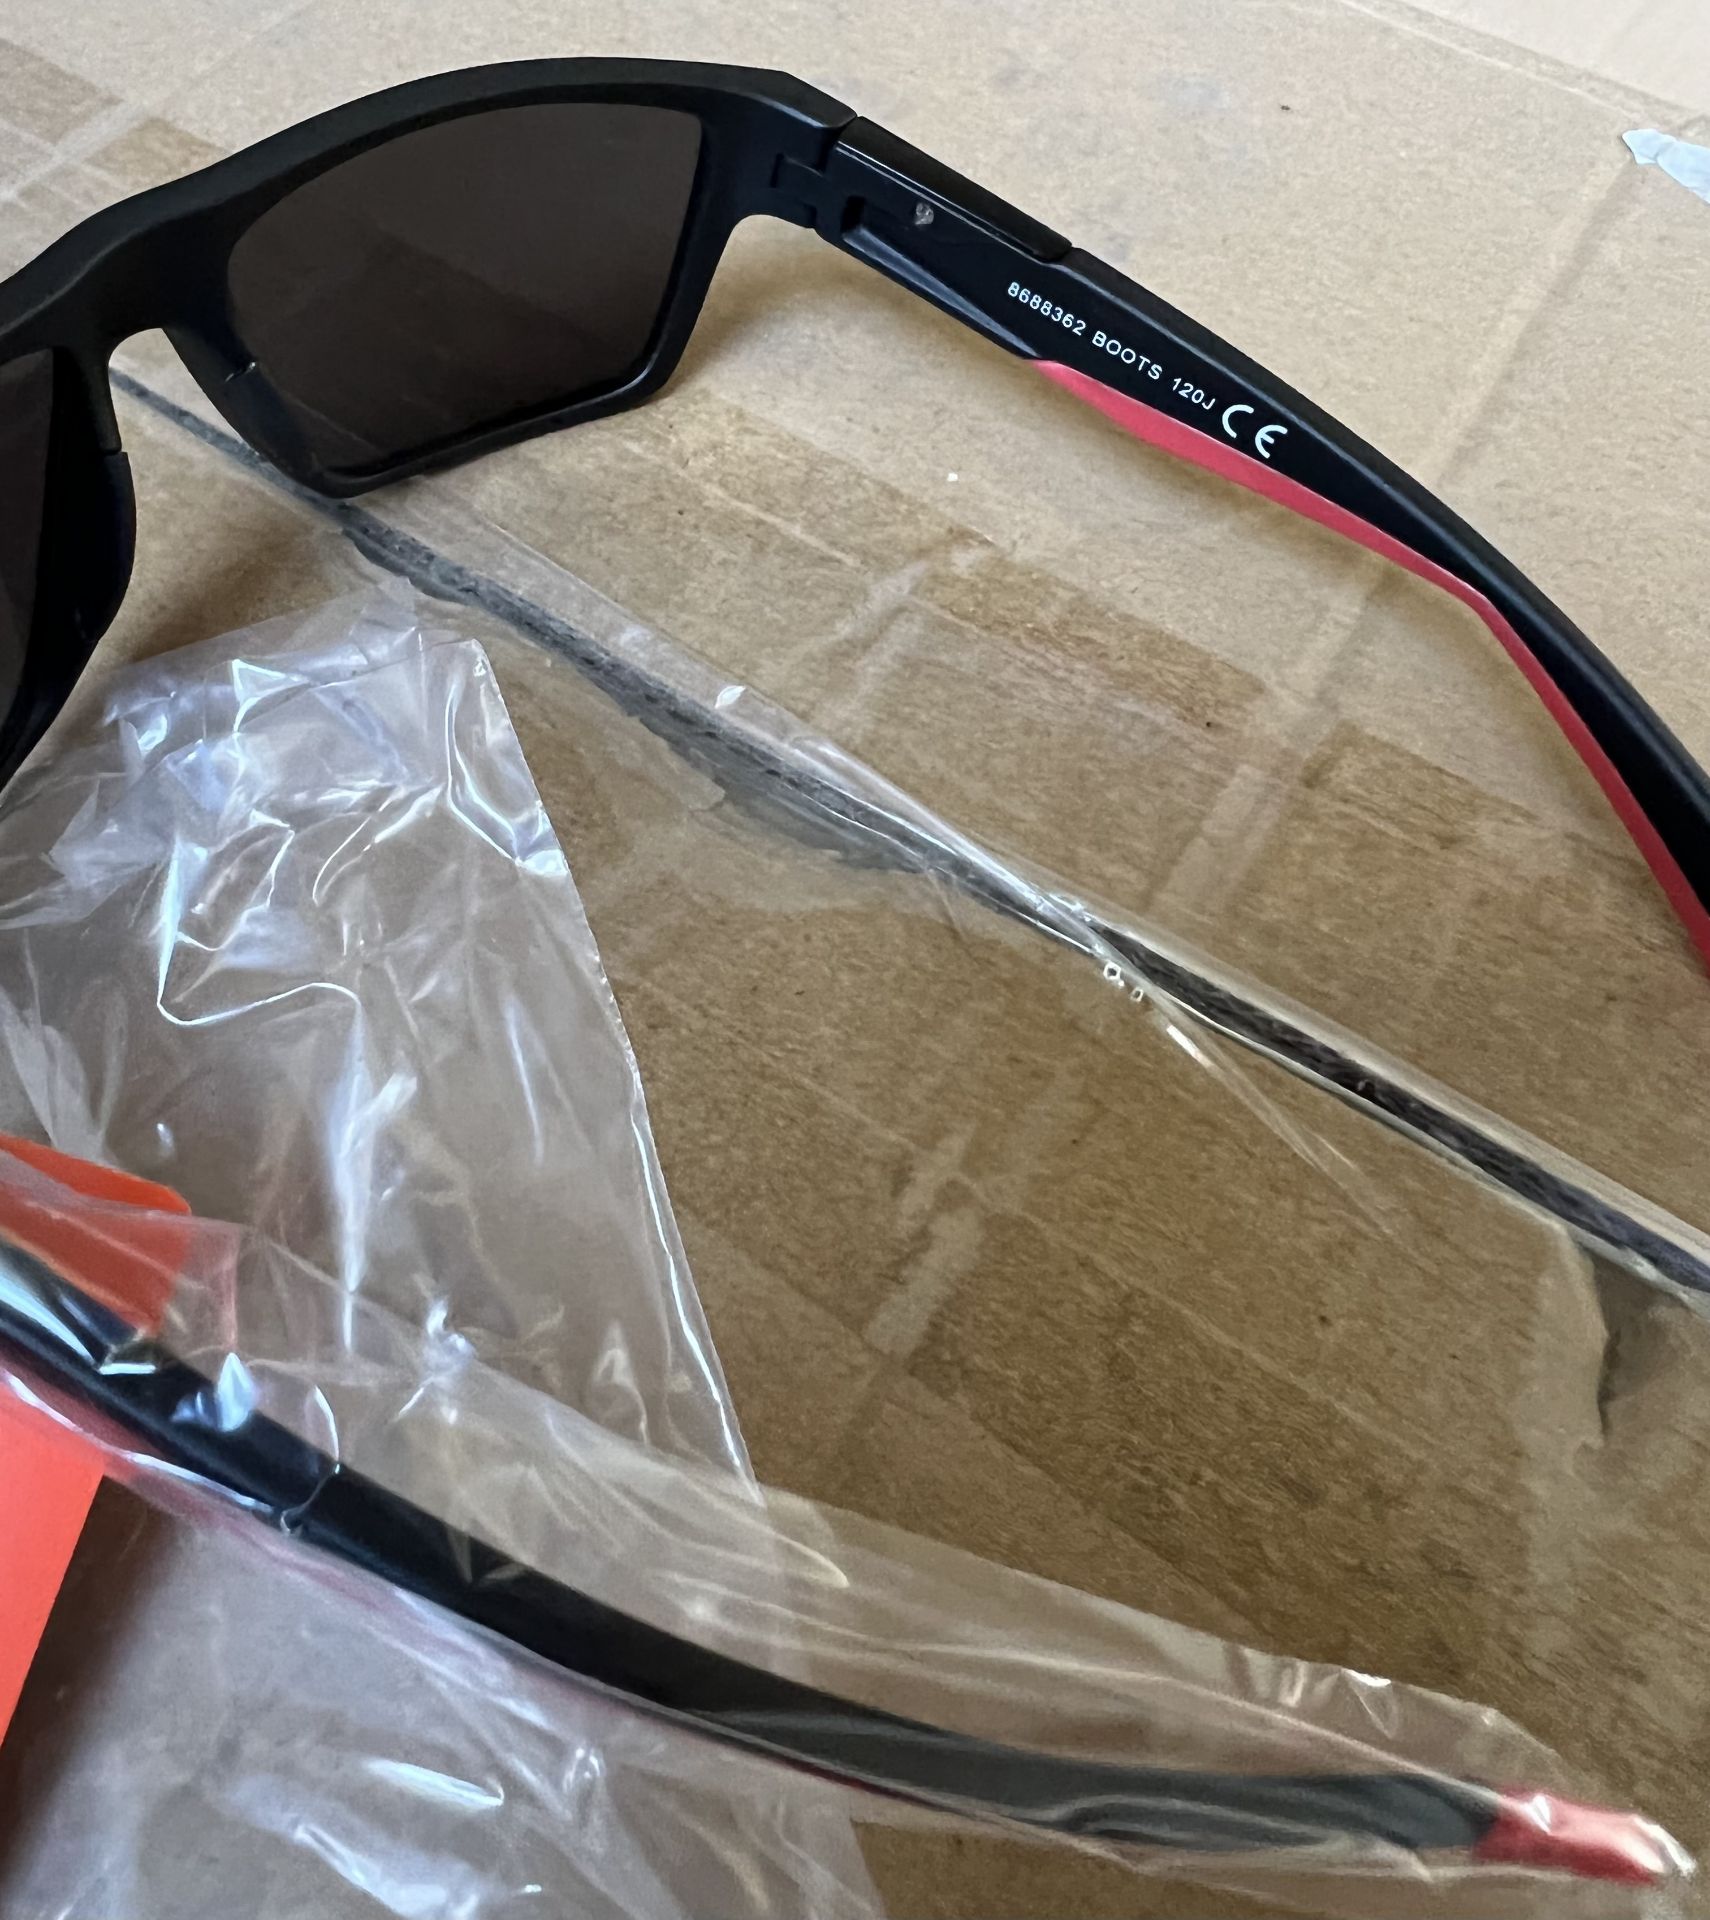 20 x Boots Active Sports Styled Sunglasses 100% UVA - (NEW) - BOOTS RRP Â£500 ! - Image 2 of 3